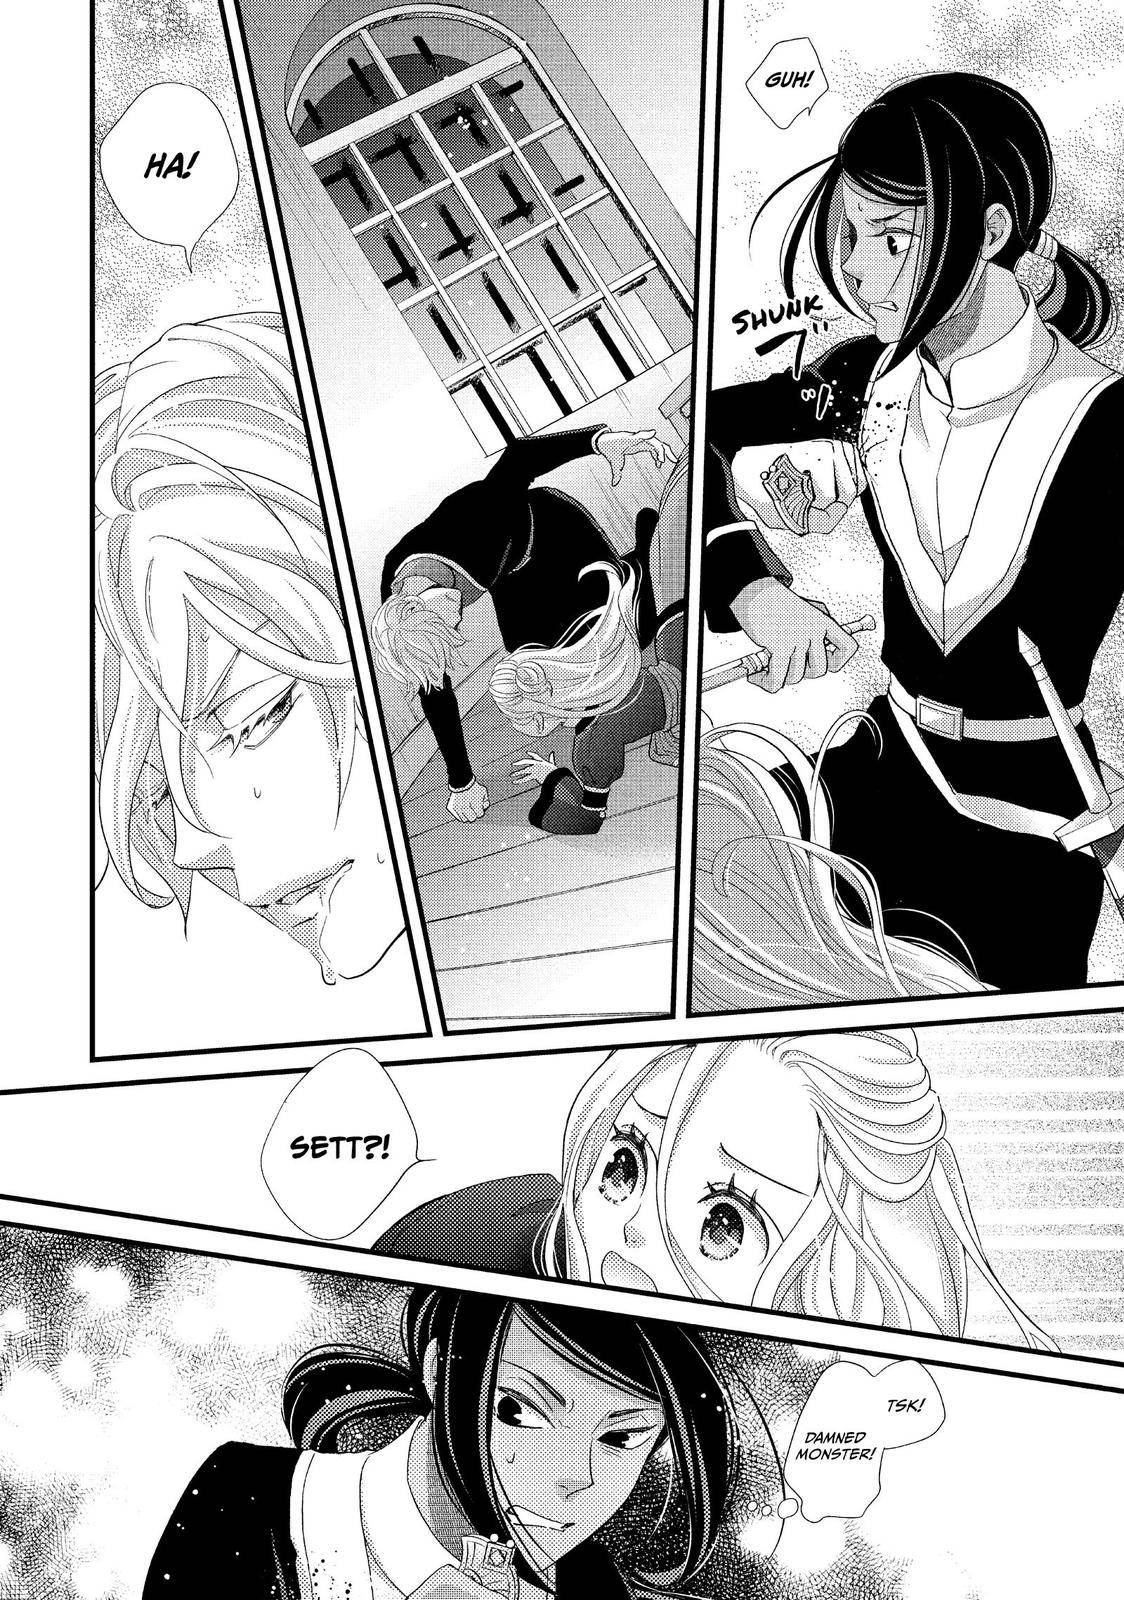 Nina the Starry Bride - chapter 23 - #4